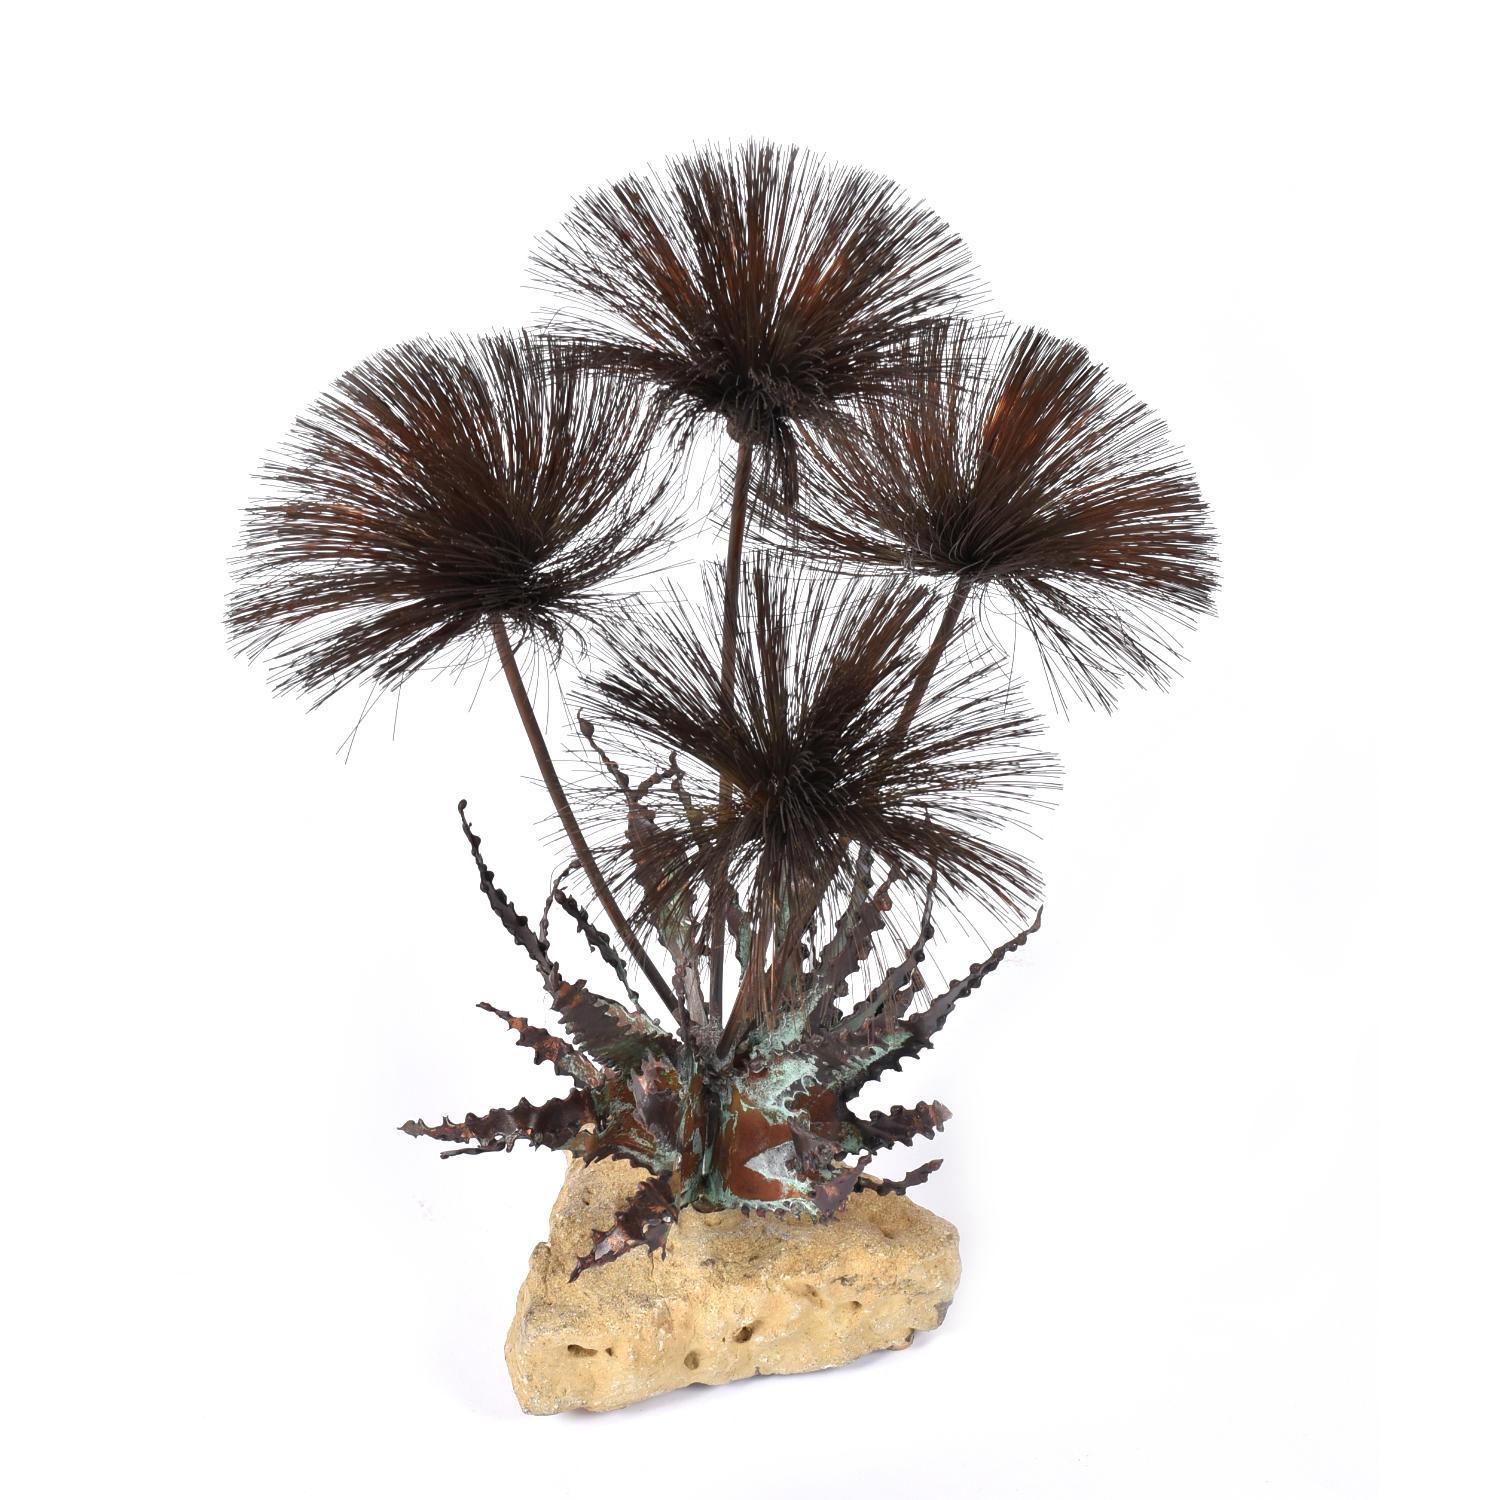 Vintage 1960s metal and stone table top sculpture. “Desert Rose” by John Steck is a timeless floral arrangement of bristly pom-pom blooms emanating from a stone base. The botanical aspects are all made of copper and brass. The flower heads are made